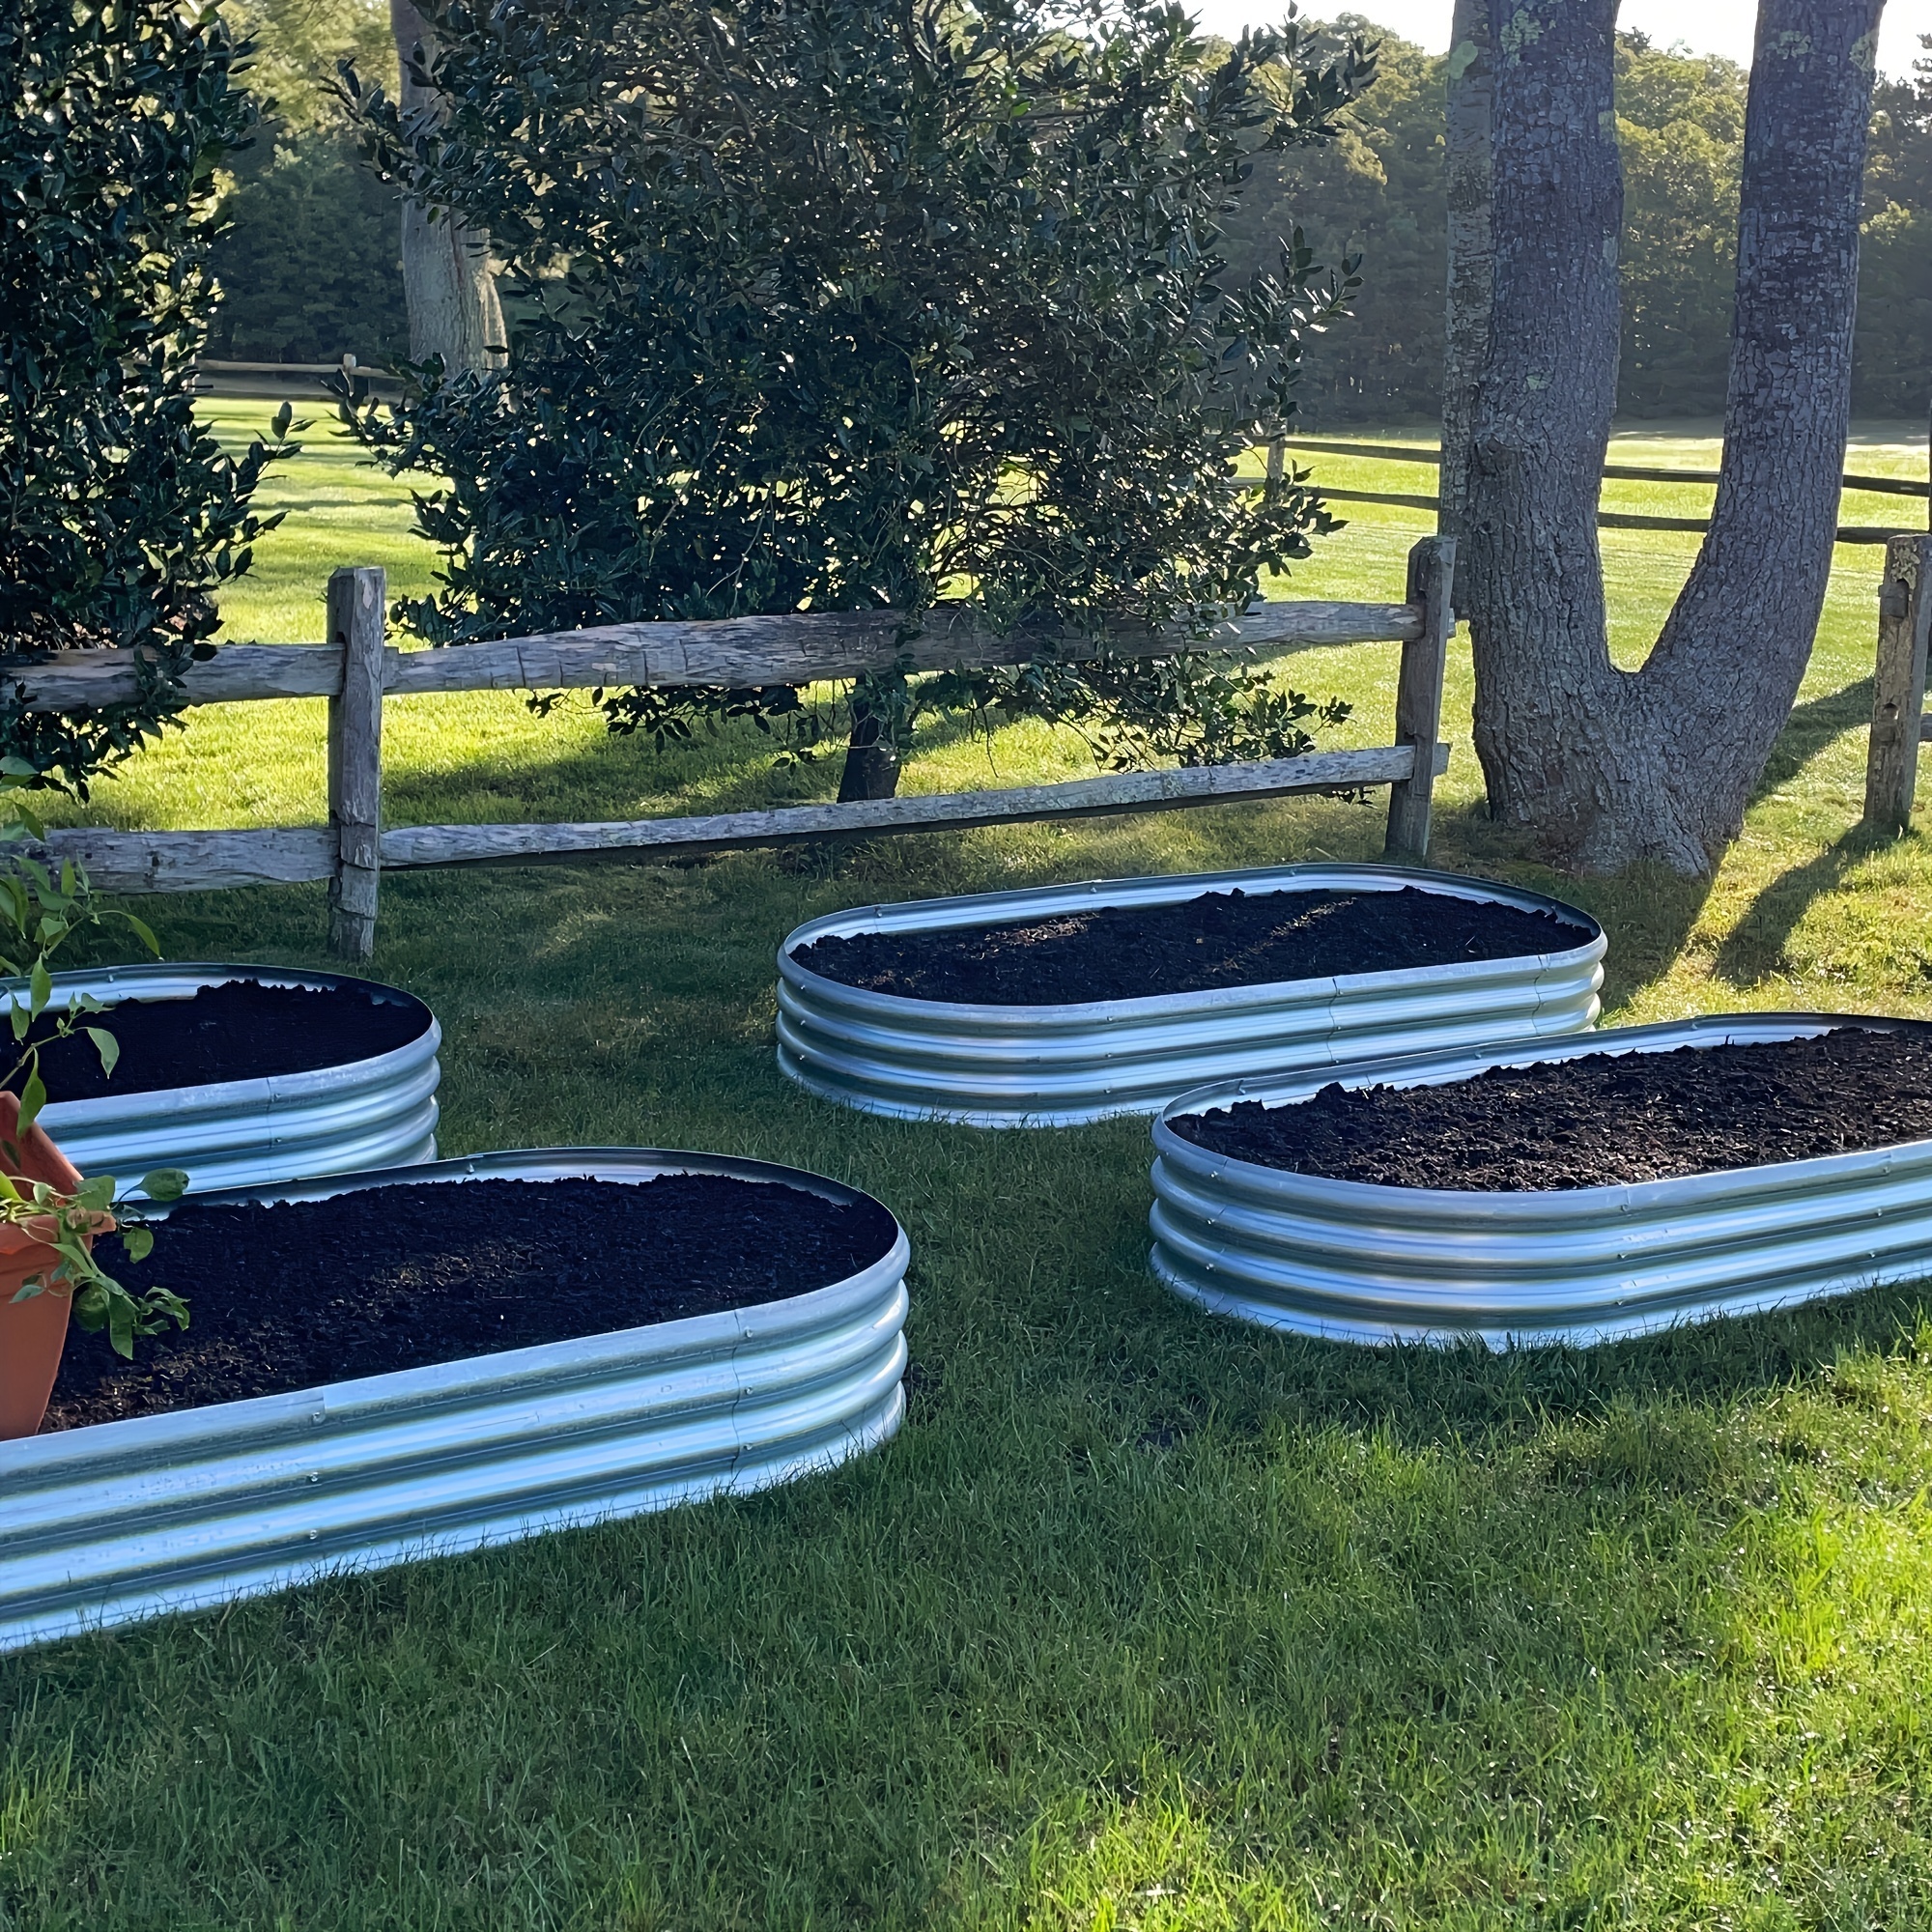 

2pcs Oval Metal Raised Garden Beds, 4ft X 2ft X 1ft Outdoor Planting Boxes For Vegetables, Flowers, Herbs, Galvanized Steel Planter Kit With Open-ended Base For Healthier Plant Growth